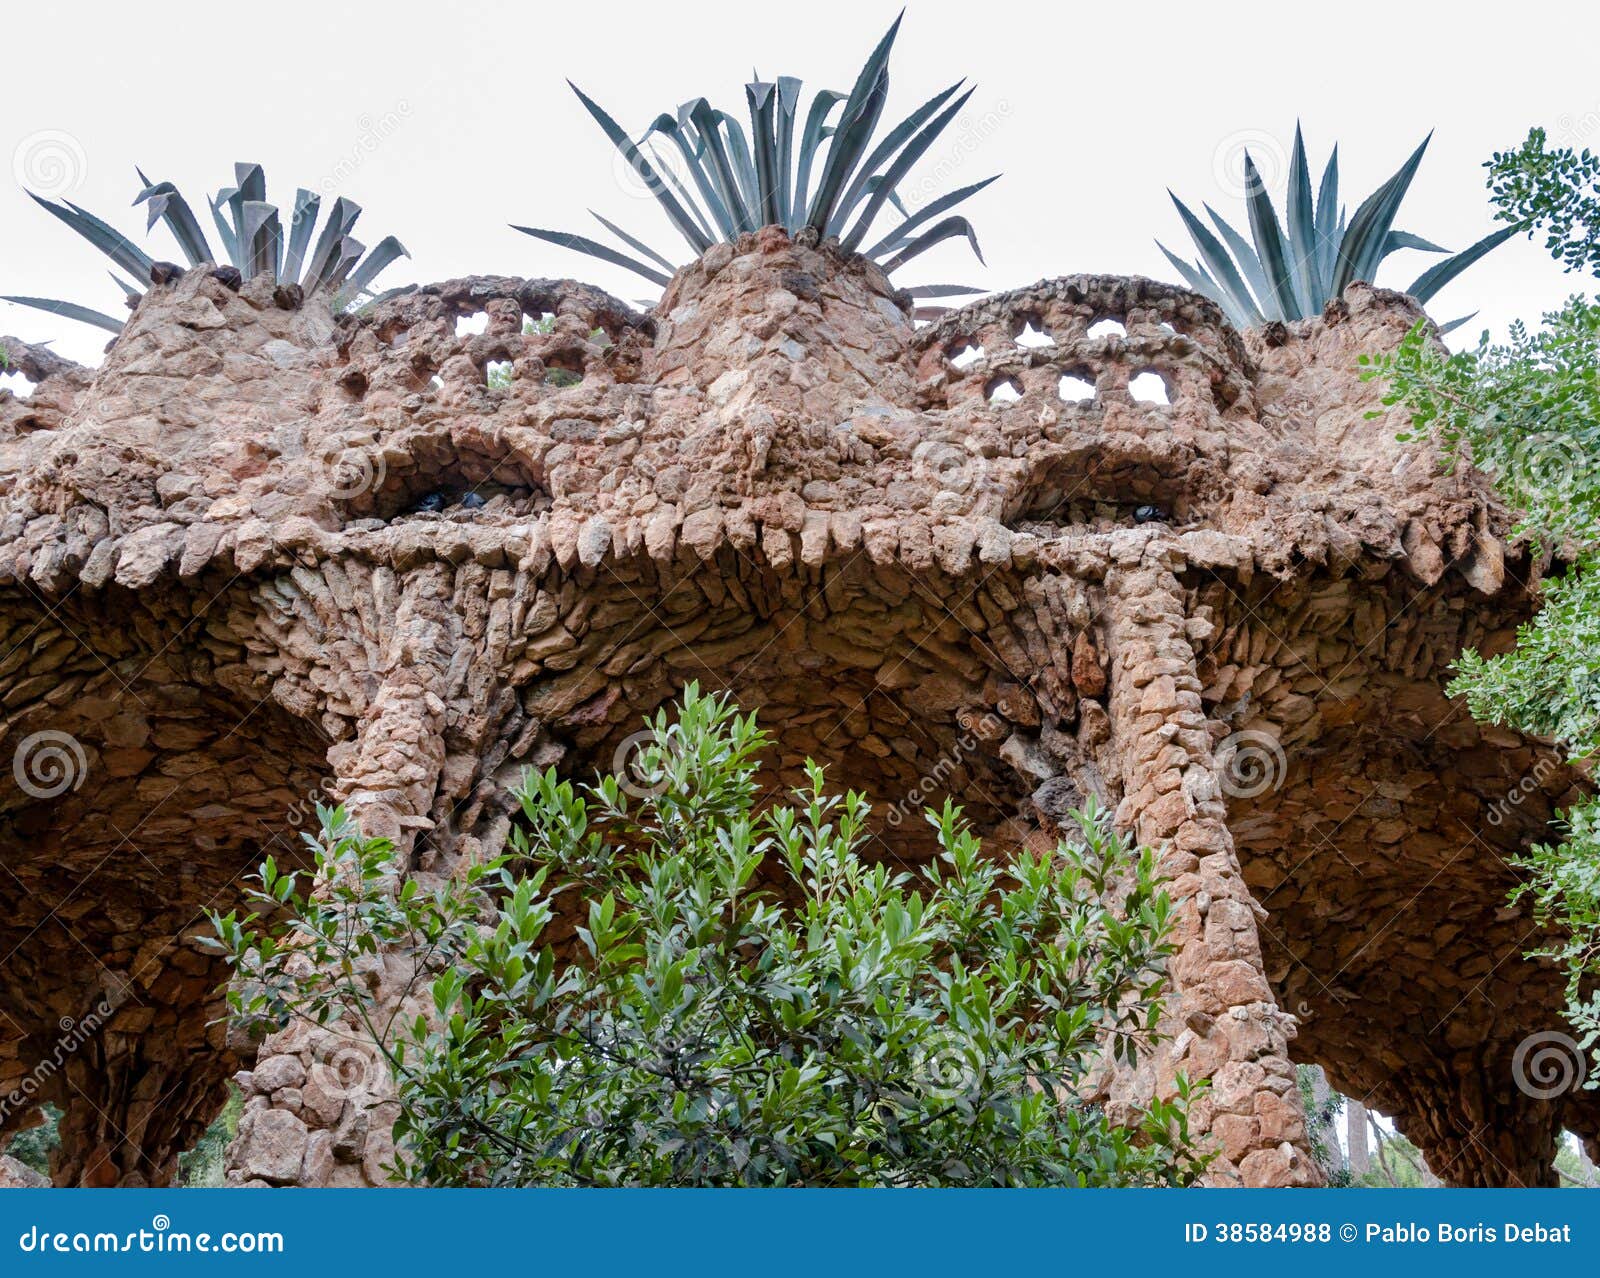 viaducto and plants in park guell at barcelona